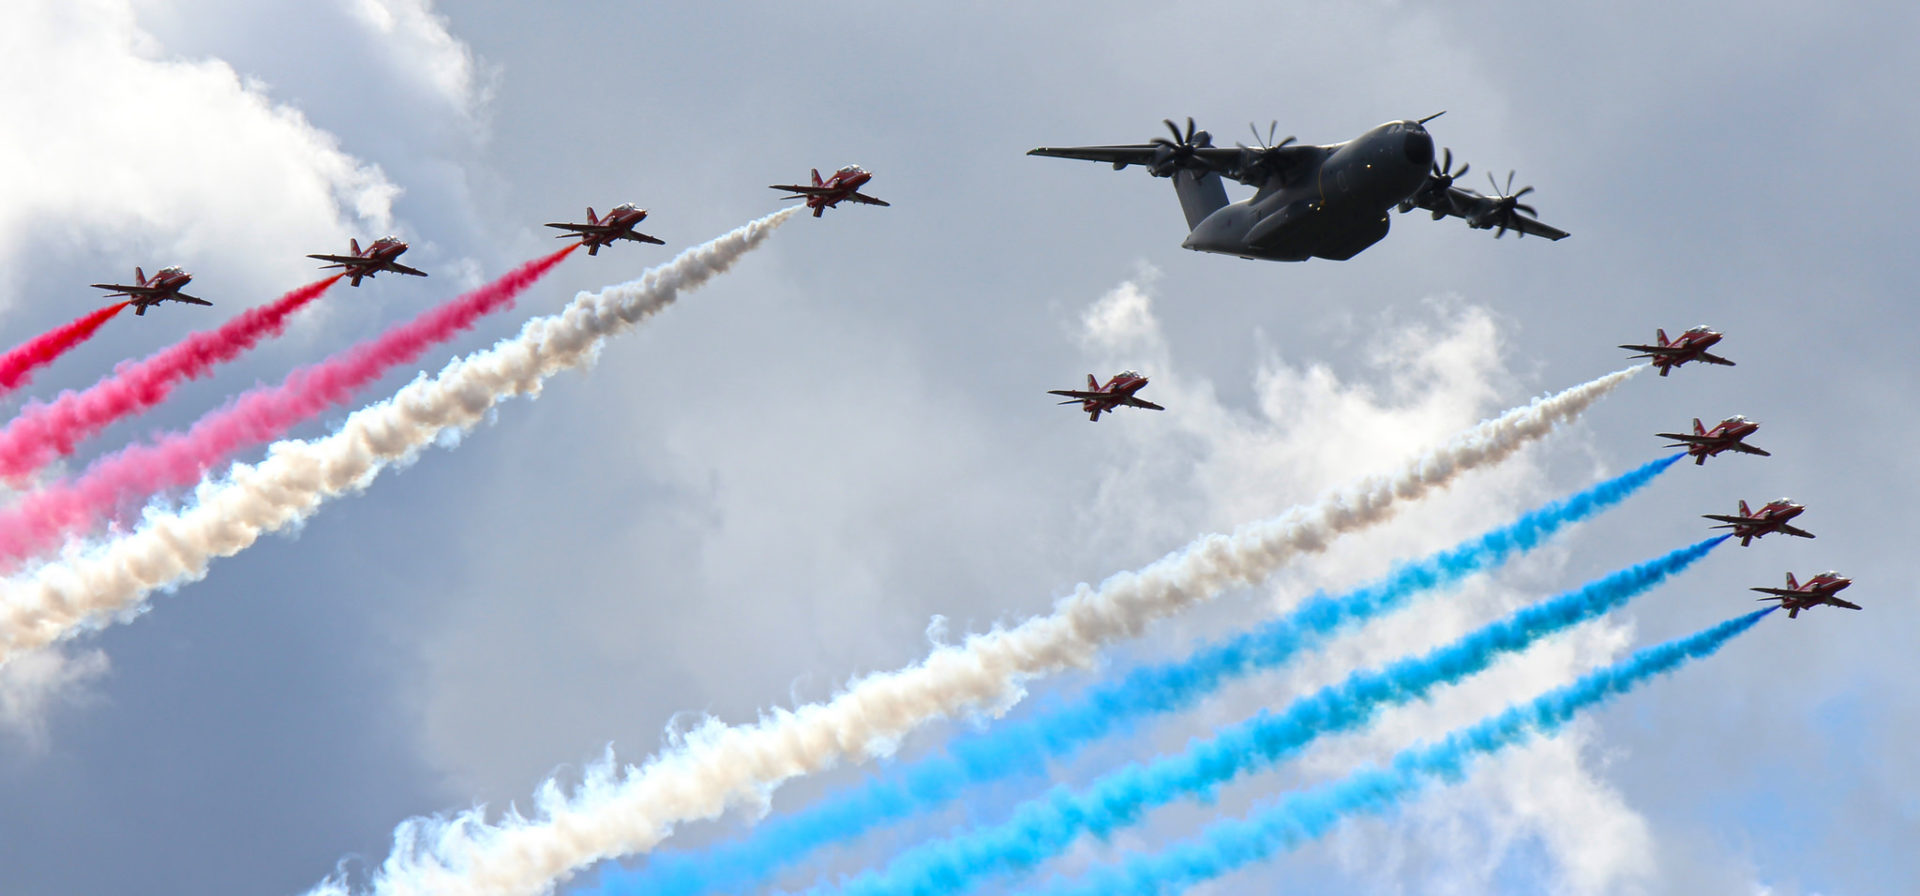 The Red Arrows and Airbus A400M at the Farnborough International Air Show (Image: Aviation Media Co.)